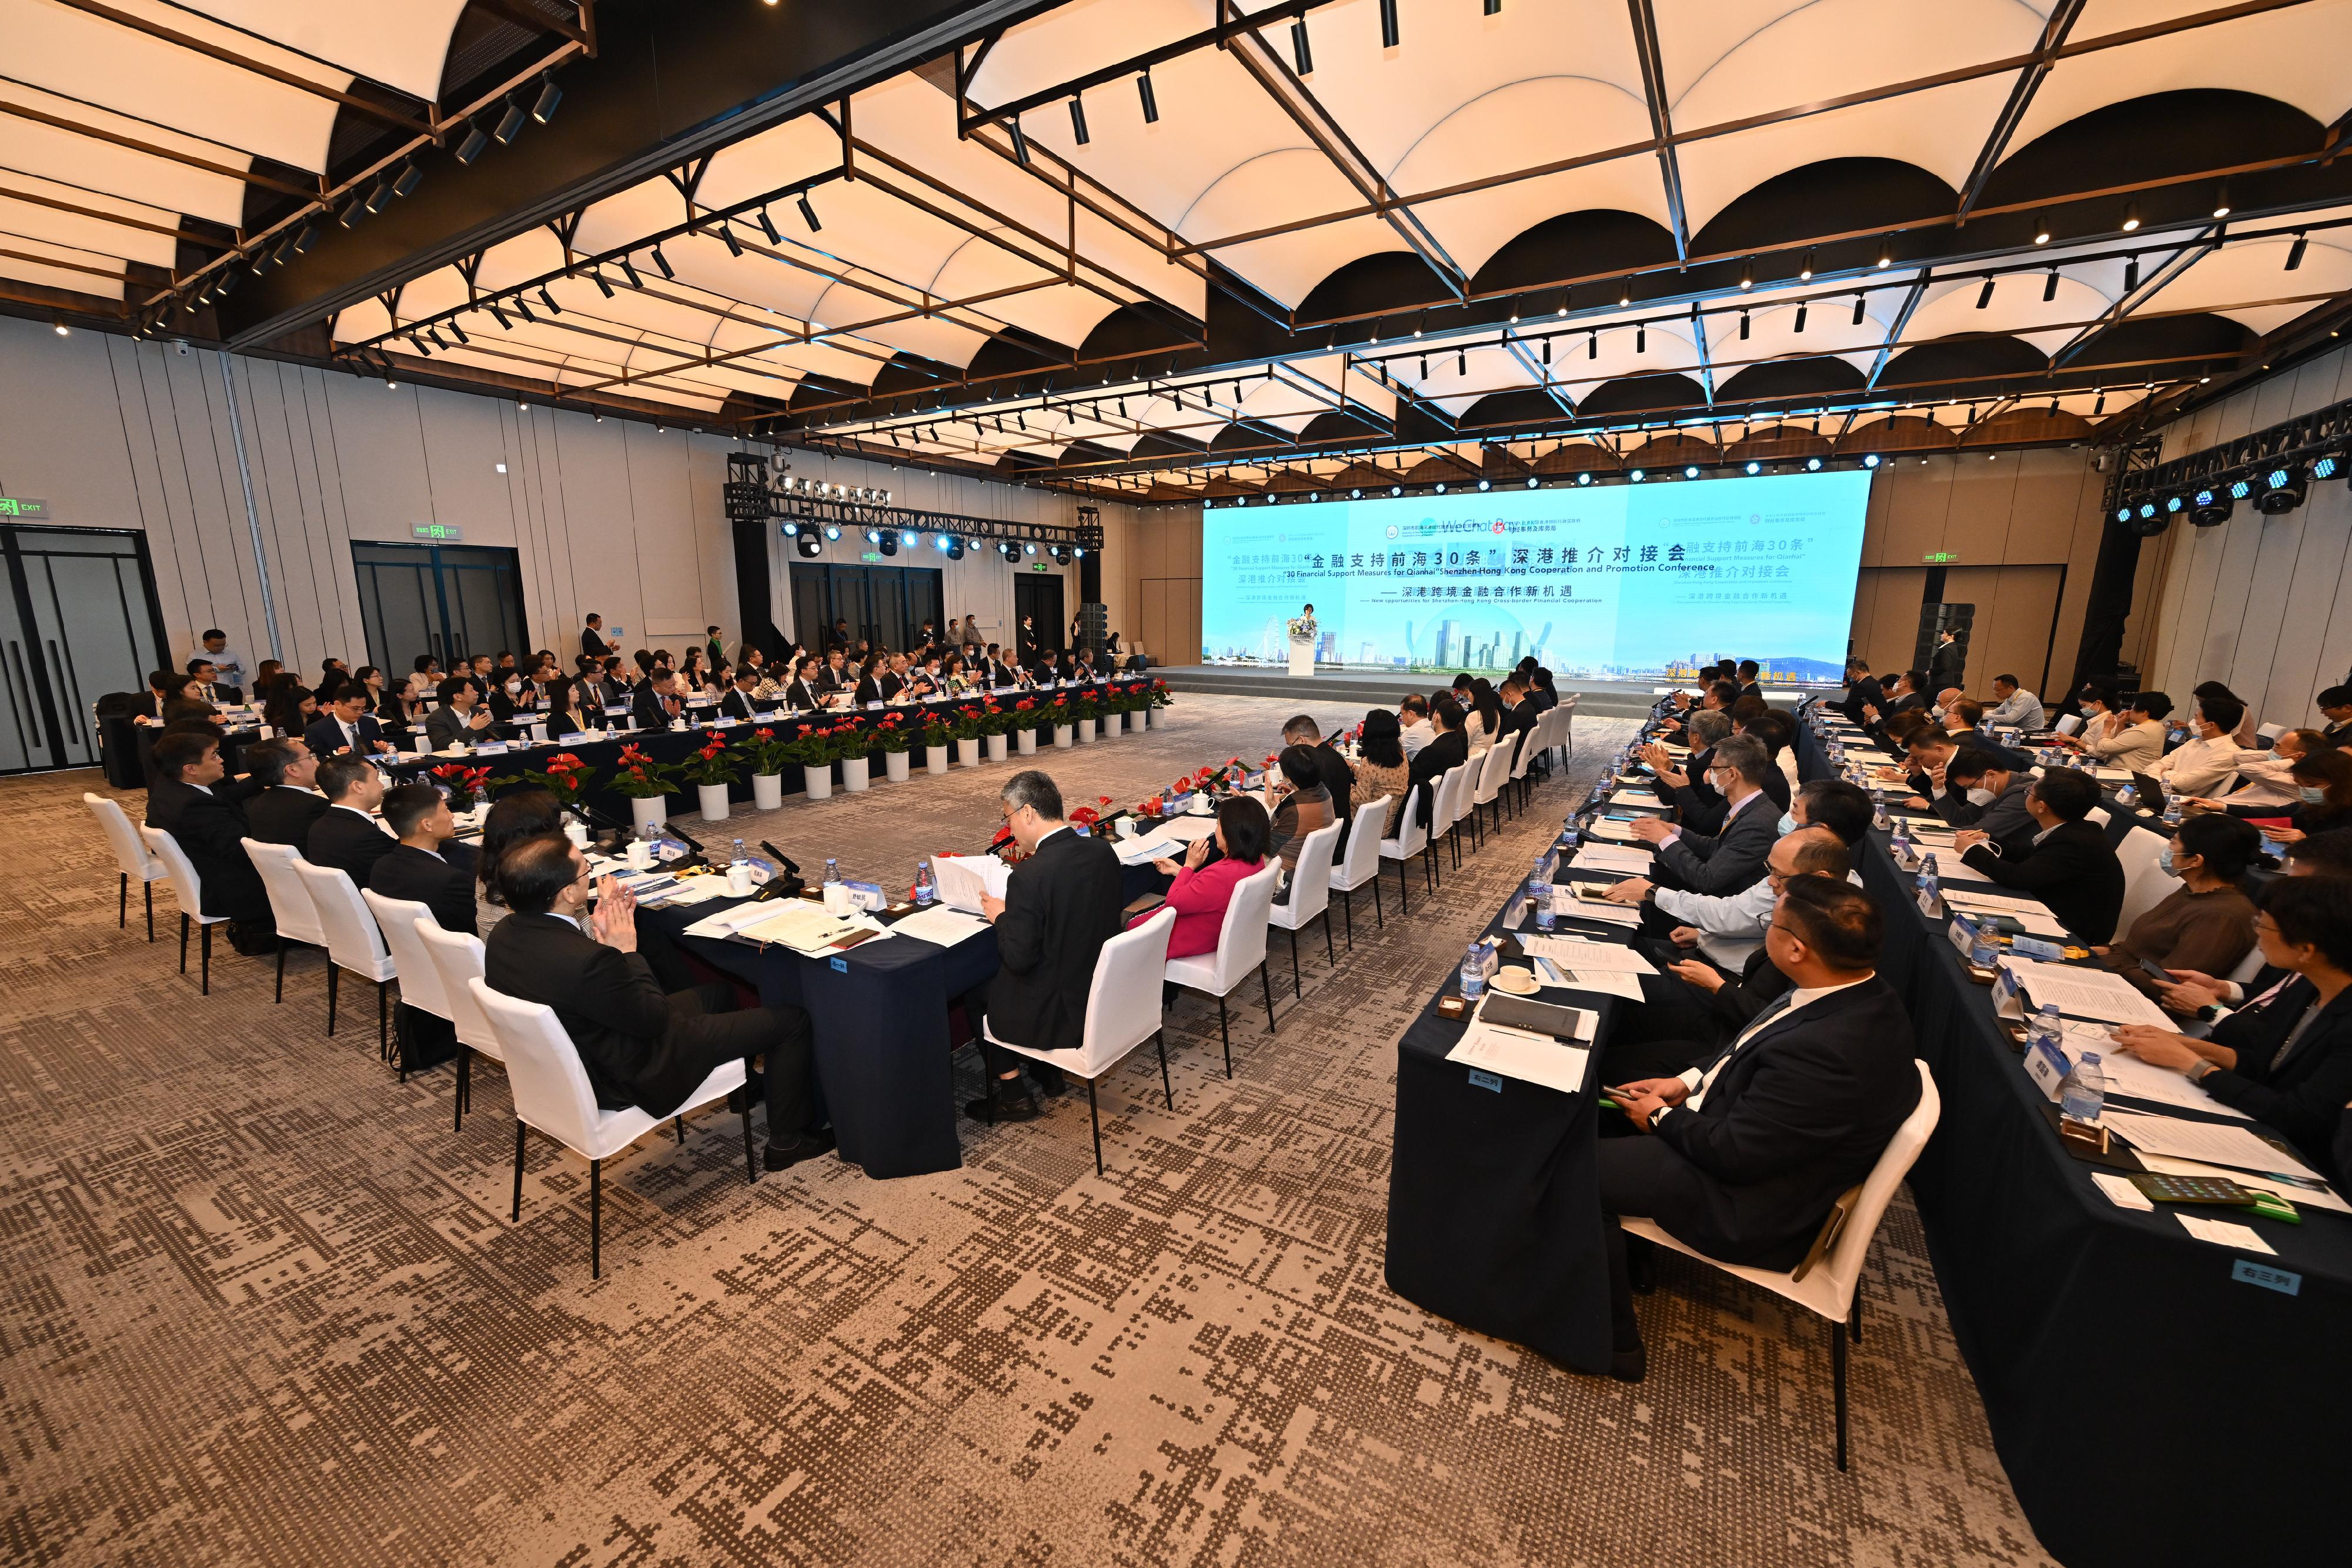 The Secretary for Financial Services and the Treasury, Mr Christopher Hui, led a Hong Kong financial sector delegation to attend a Shenzhen-Hong Kong liaison event on promoting 30 Financial Support Measures for Qianhai held in Shenzhen today (May 18). Photo shows representatives of financial institutions in Shenzhen and Hong Kong sharing their implementation plans relating to the 30 Financial Support Measures for Qianhai.  